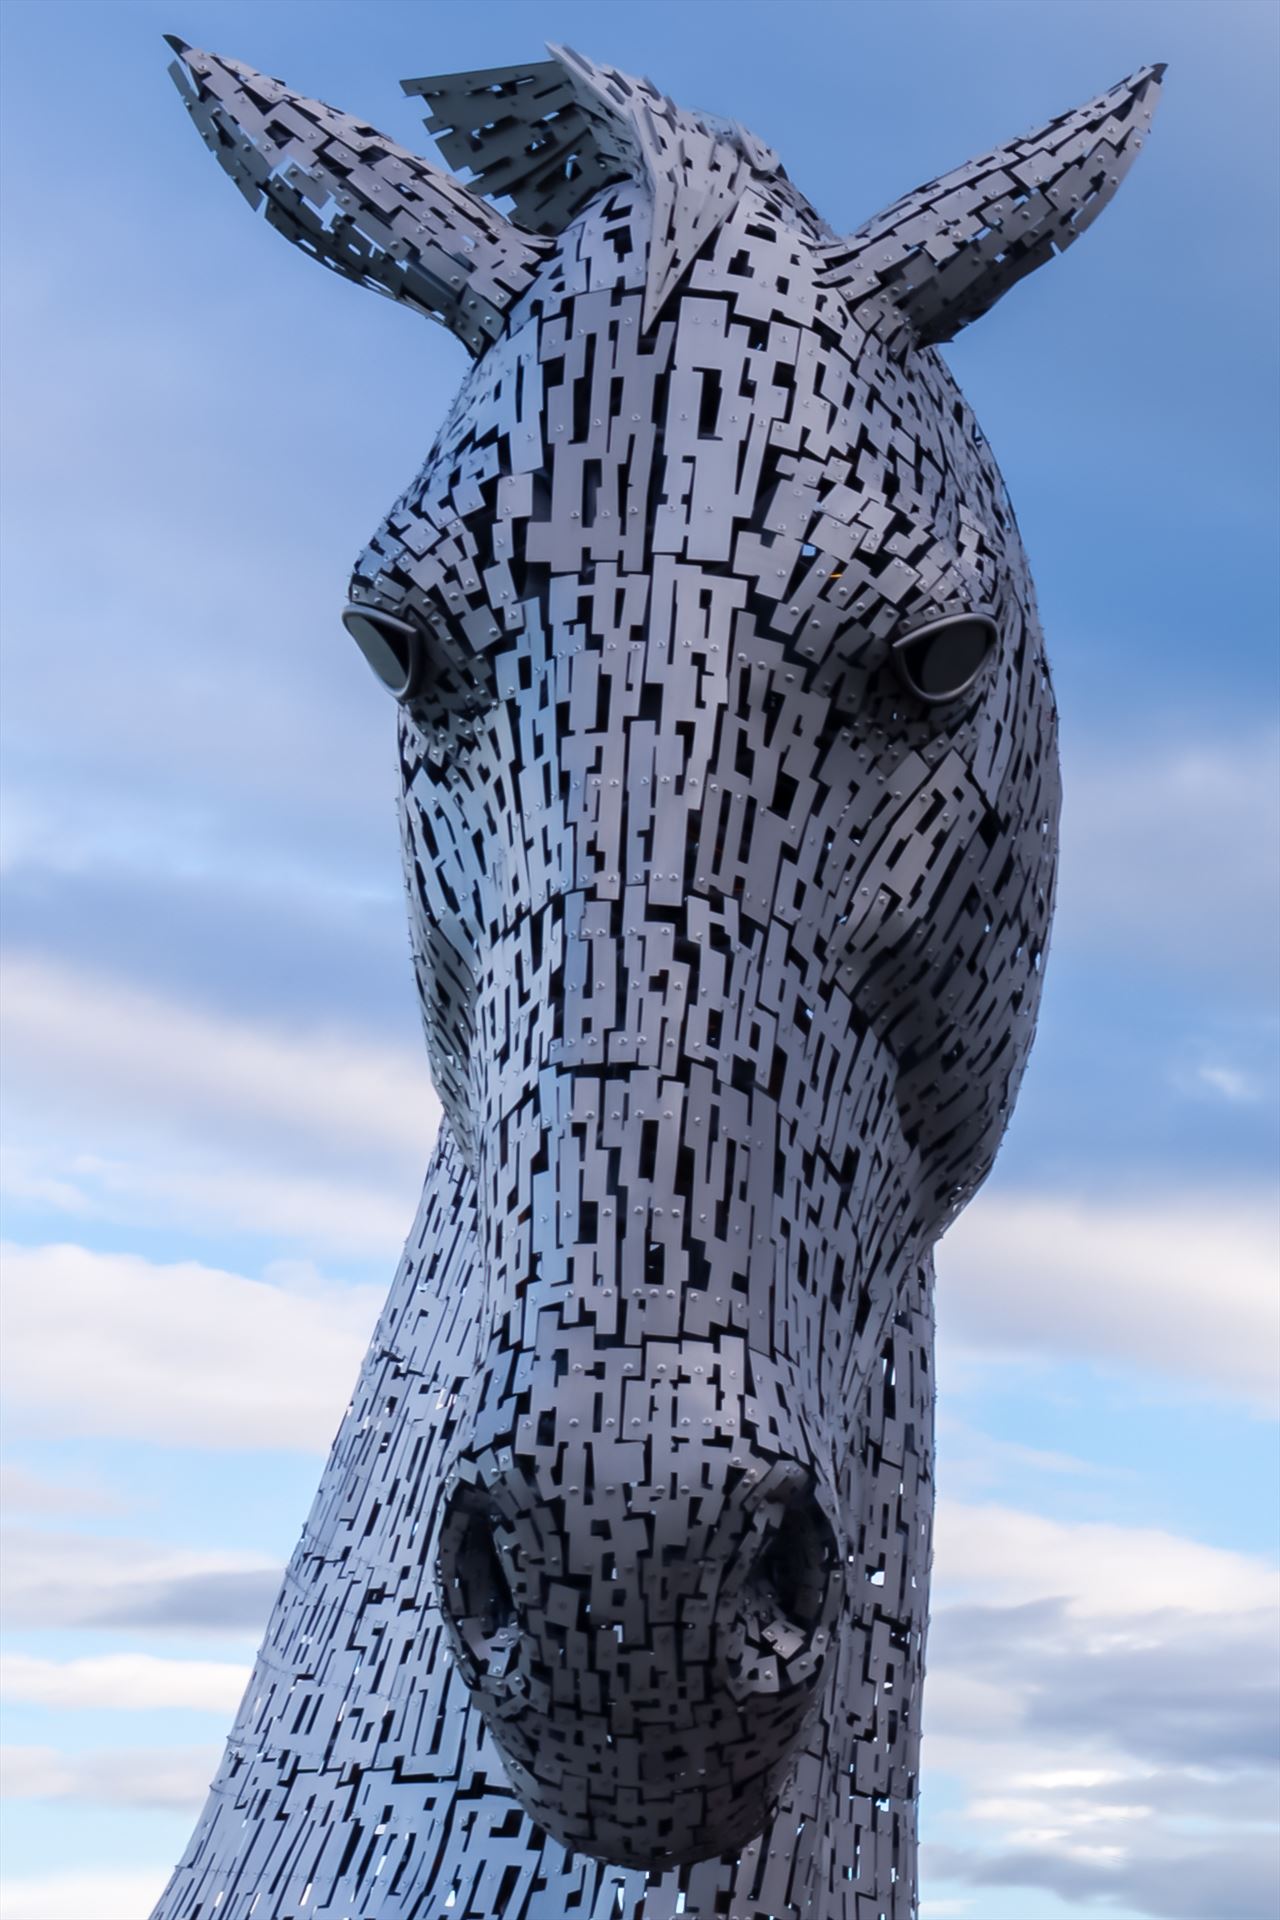 One of the Kelpies The Kelpies are 30-metre-high horse-head sculptures, standing next to a new extension to the Forth and Clyde Canal at Falkirk. The Kelpies are a monument to horse powered heritage across Scotland. by philreay